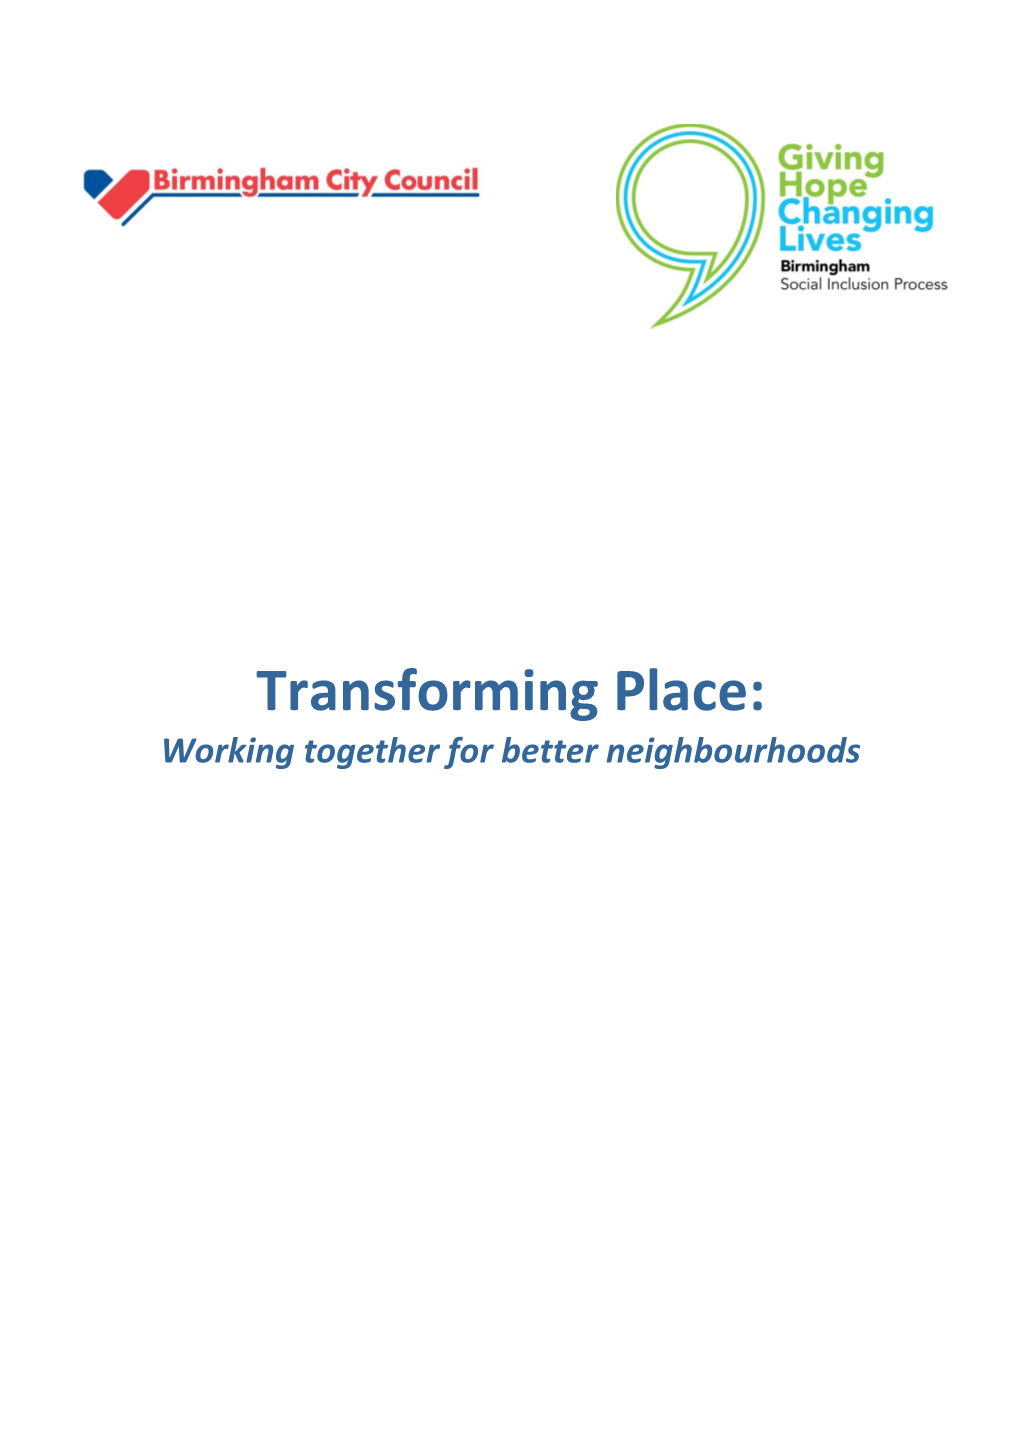 Transforming Place: Working Together for Better Neighbourhoods